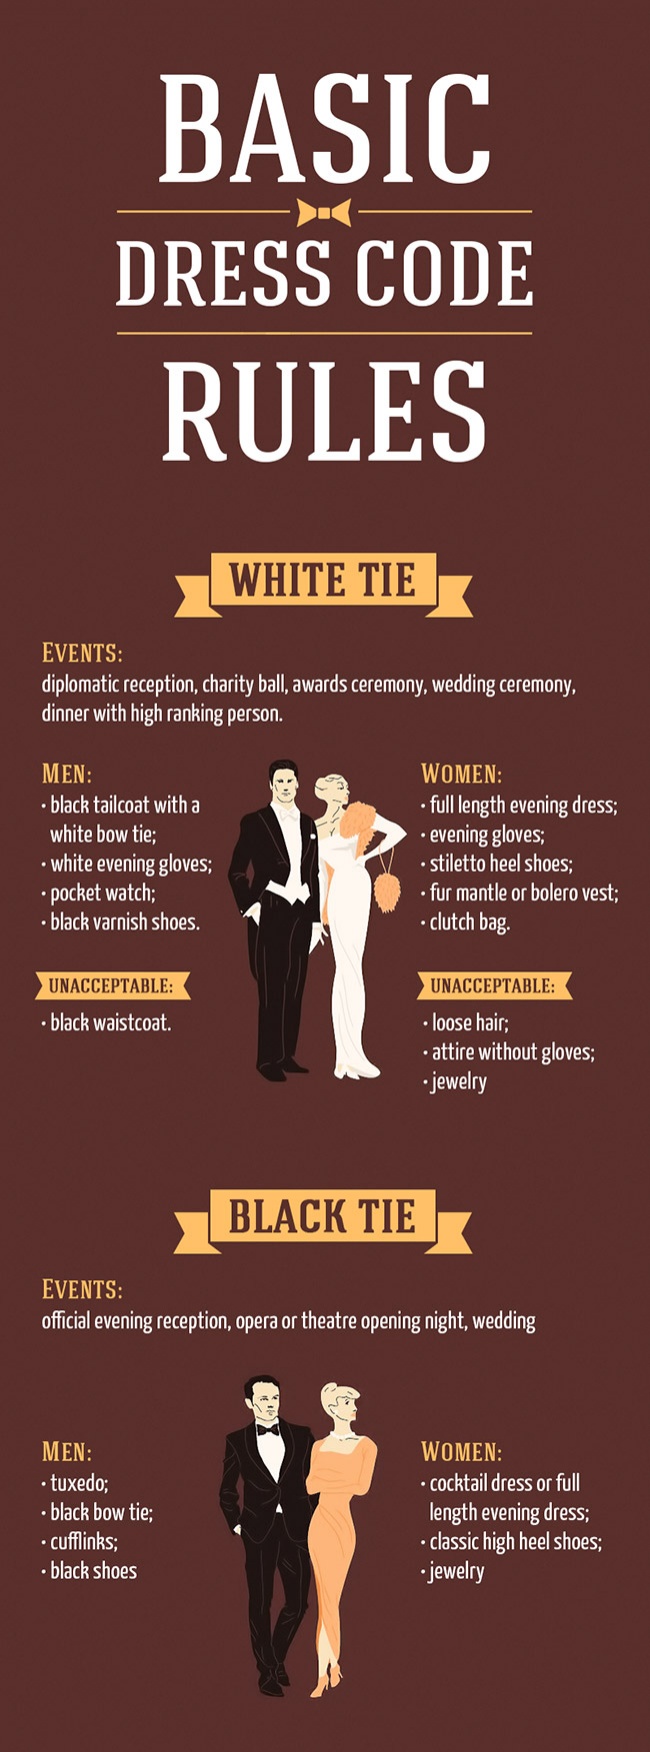 Basic Dress Code Rules Infographic - Best Infographics